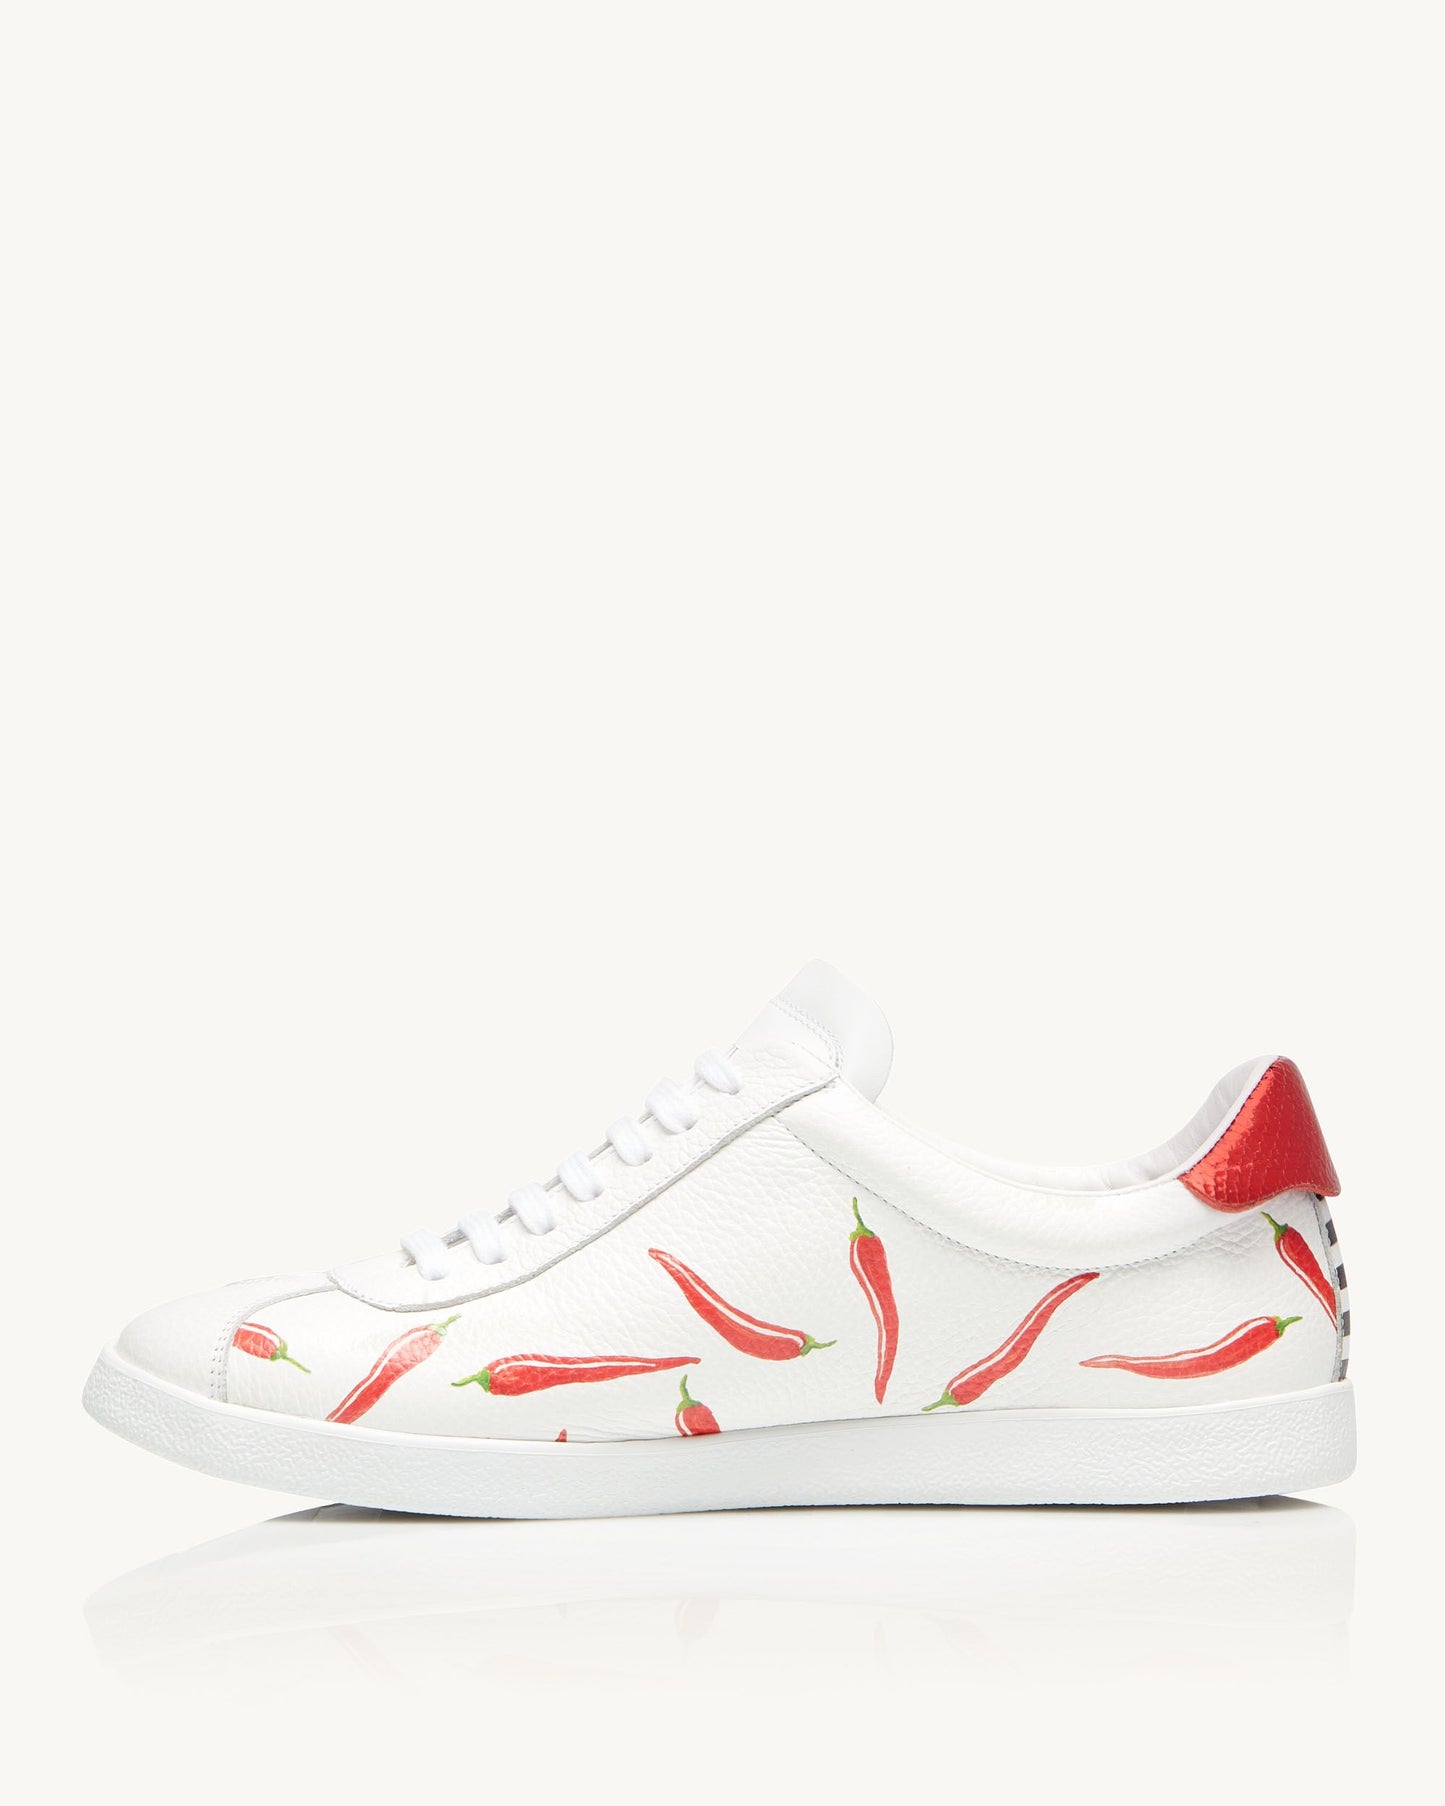 THE A CHILI SNEAKER WHITE/ RED